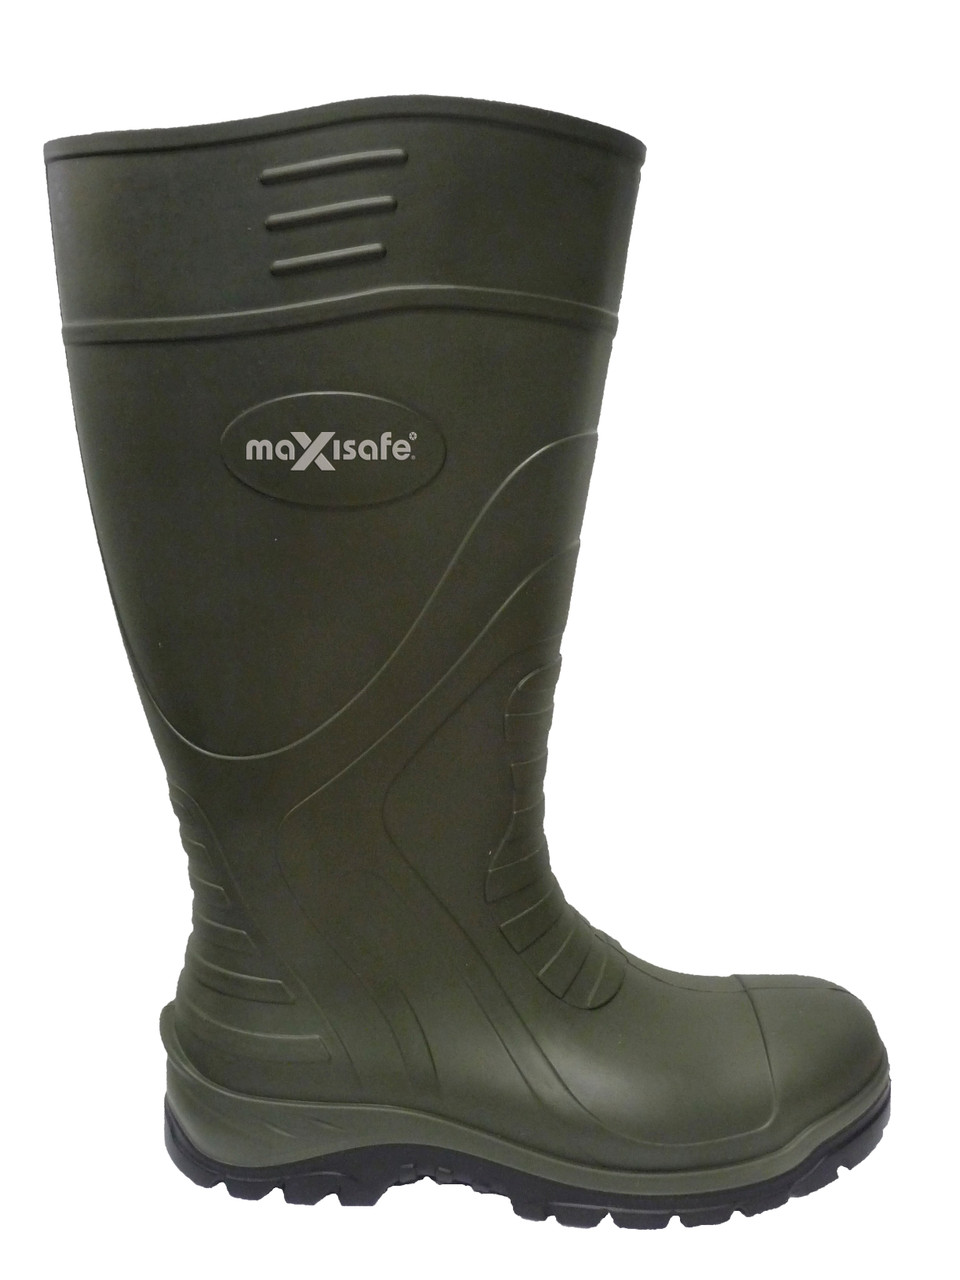 Patrol Green Pu Boot W/ Safety Toe, Size 4